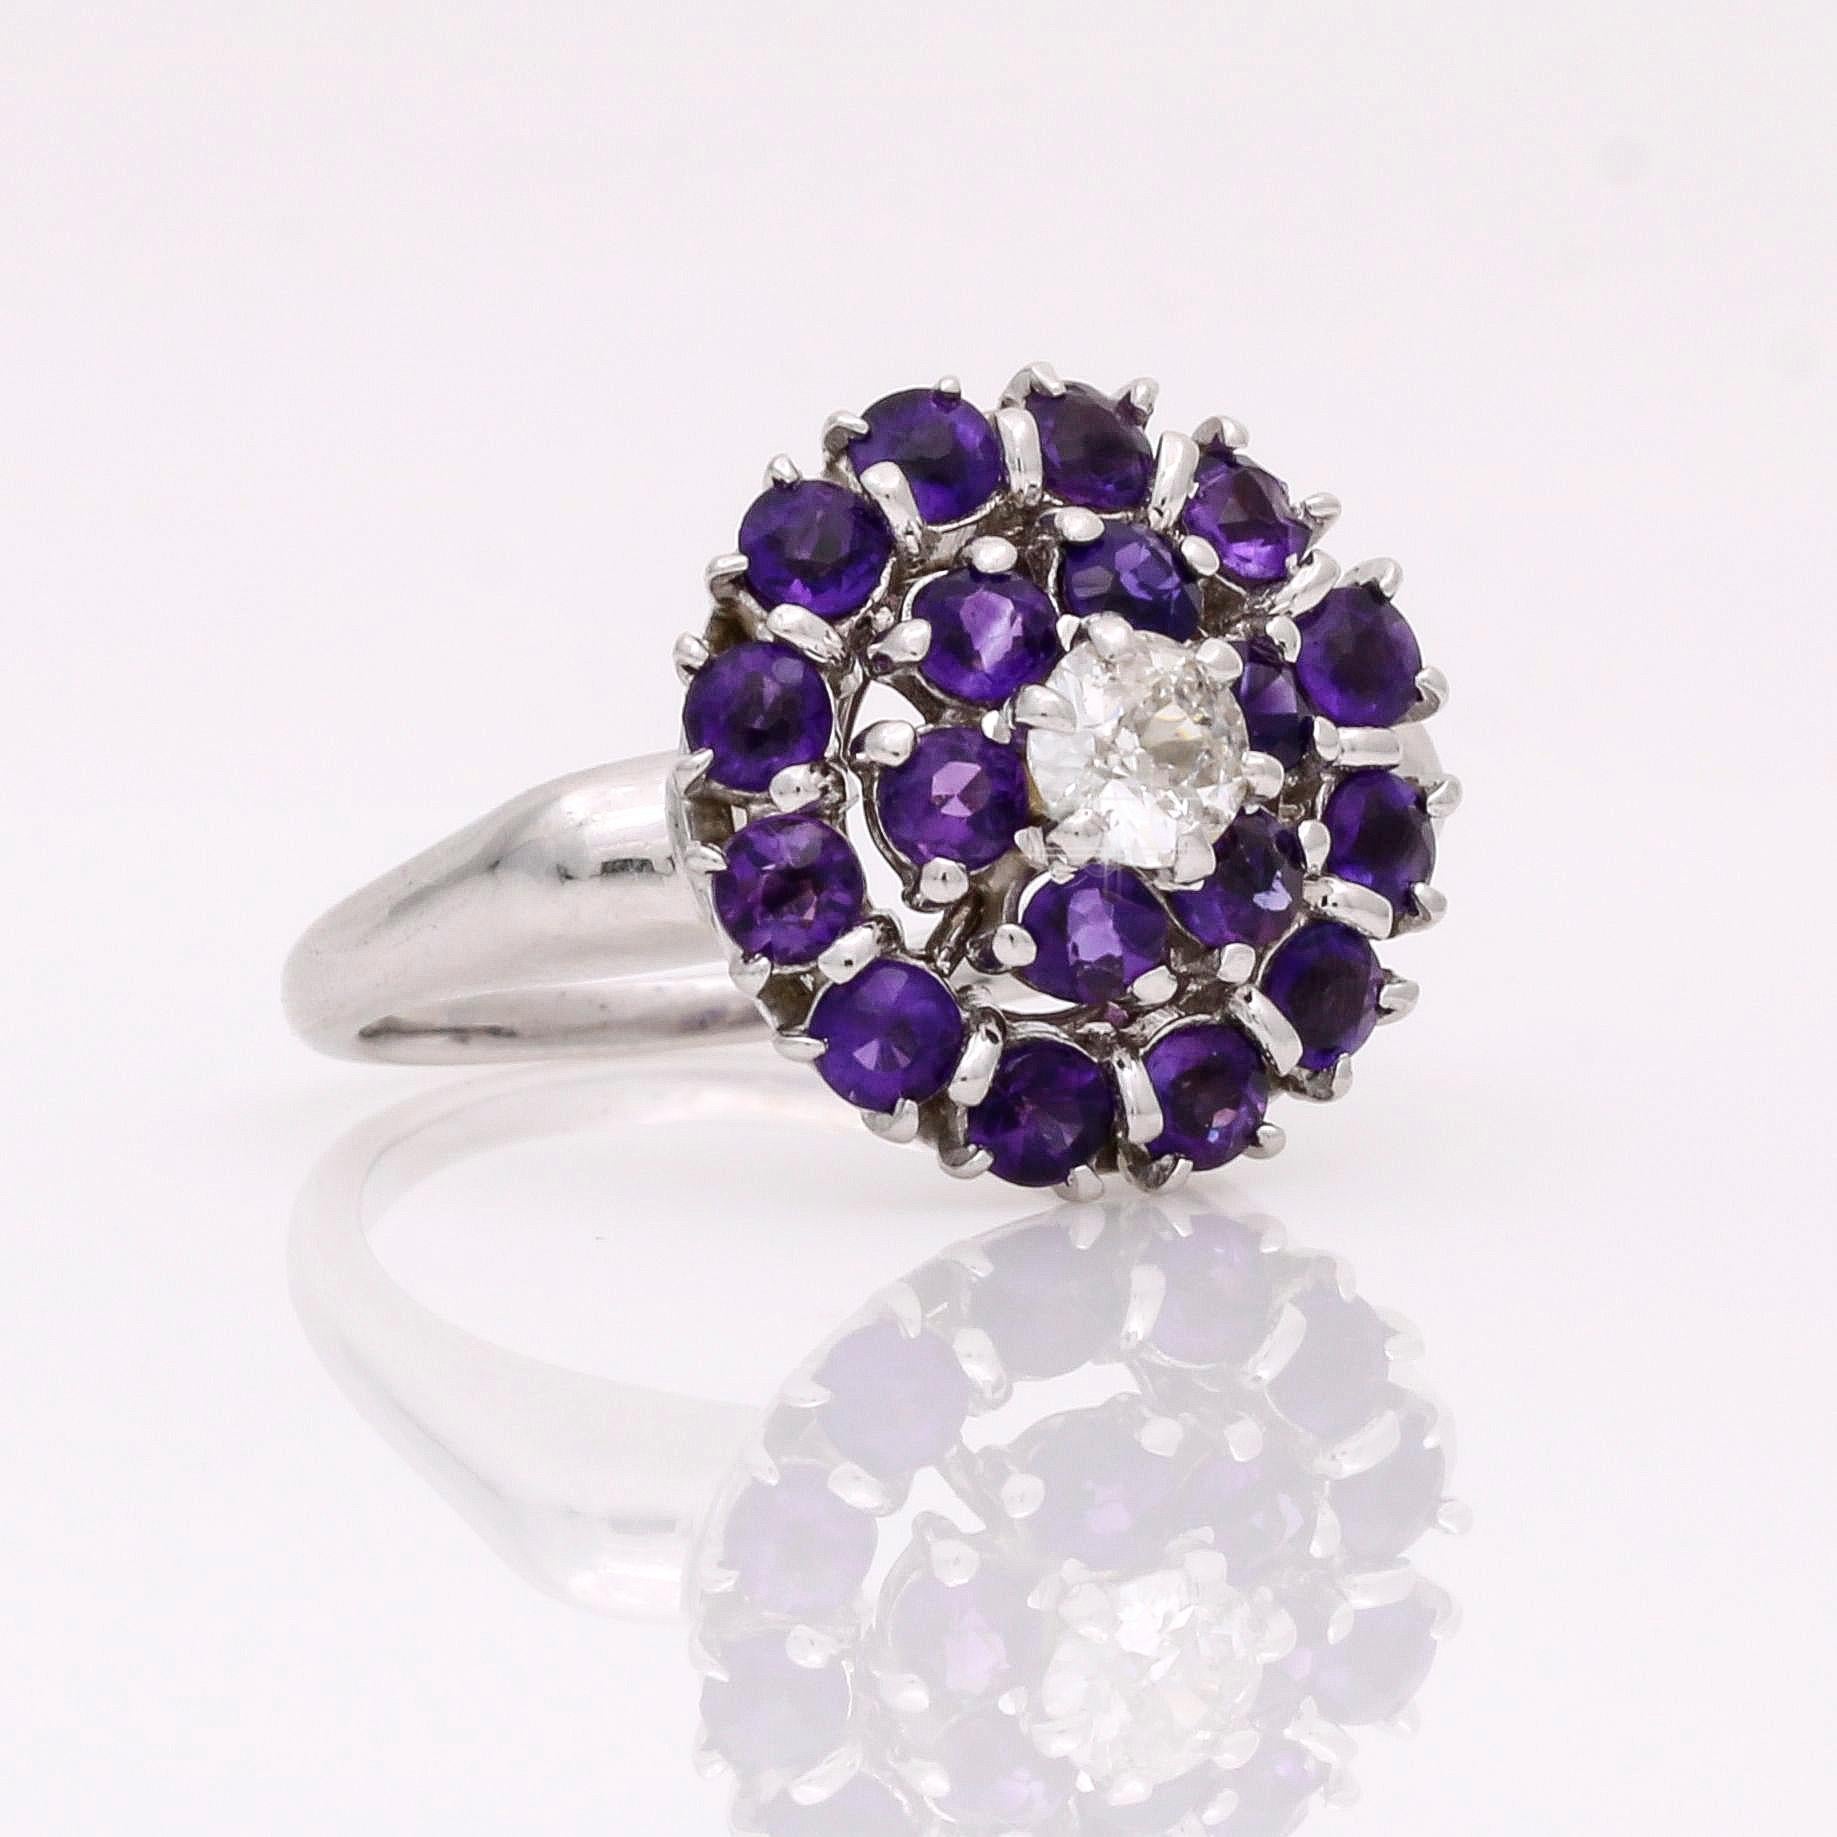 This vintage gemstone and diamond cluster ring is a timeless piece of glamorous jewelry. With a diamond at the center surrounded by two rows of round-cut amethysts, this unique ring adds an eye-catching element to your look. Wear it alone or with